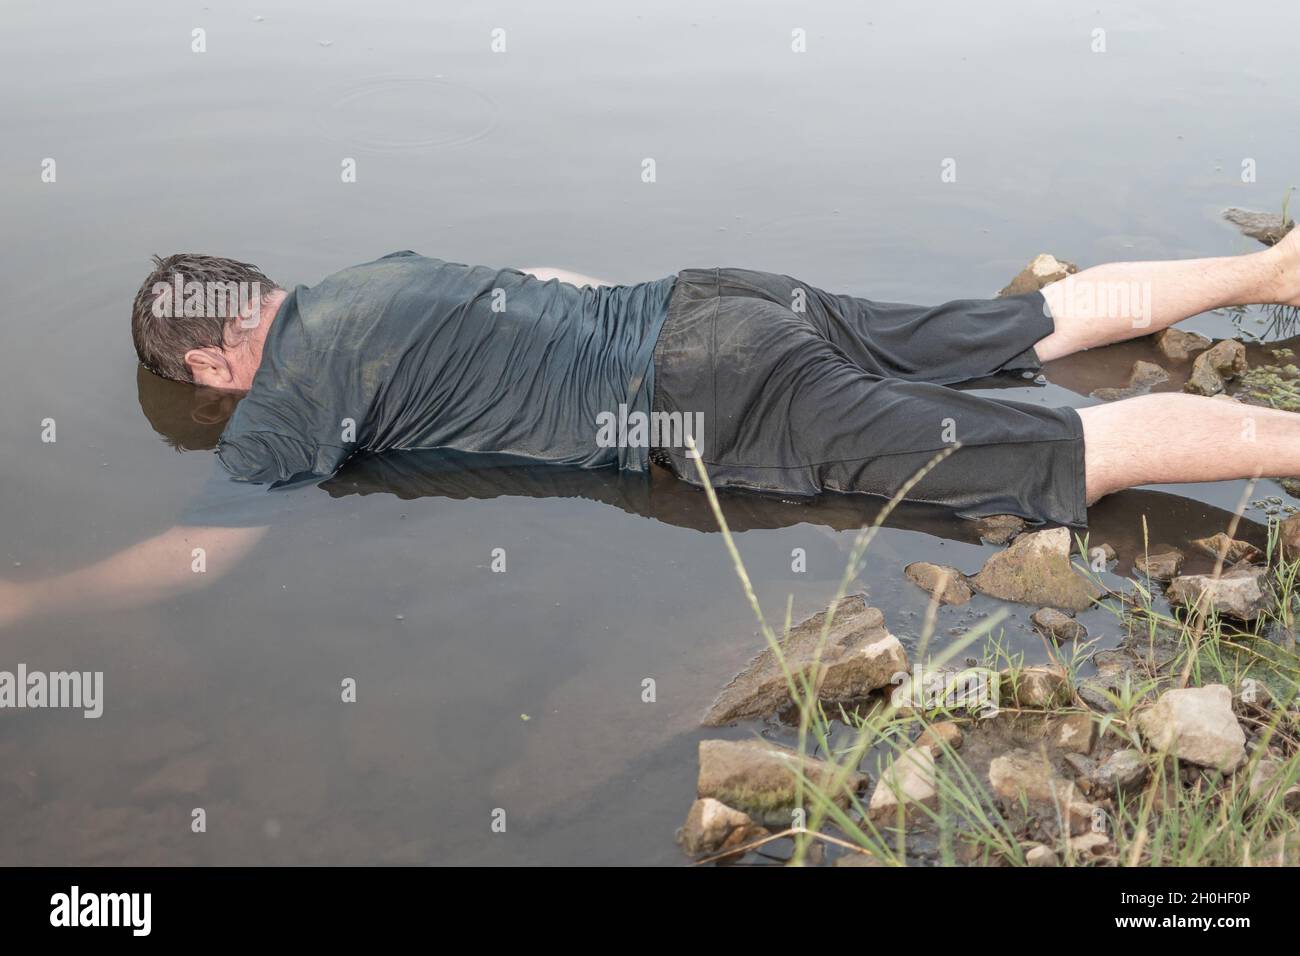 the-body-of-a-man-who-drowned-lying-face-down-in-the-water-lifeless-body-artistic-photo-painting-selective-focus-2H0HF0P.jpg